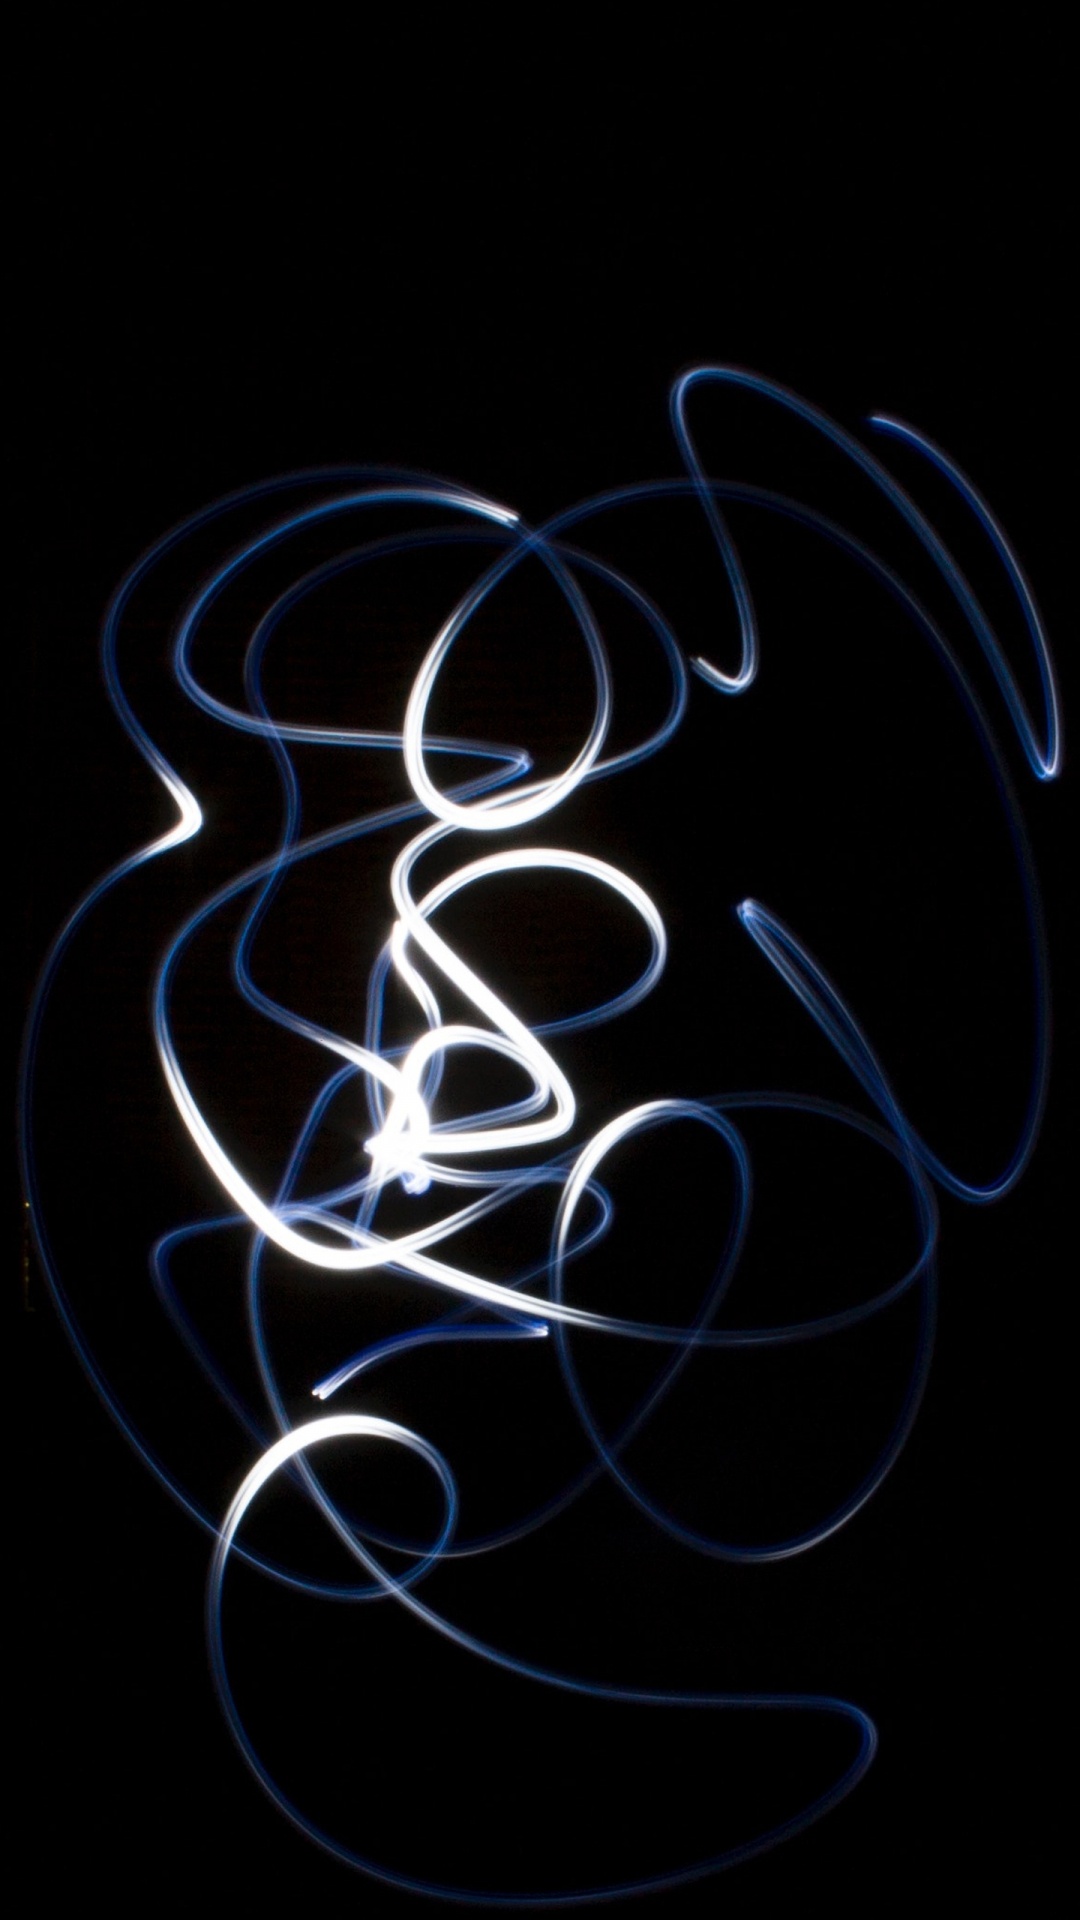 White and Blue Swirl Illustration. Wallpaper in 1080x1920 Resolution